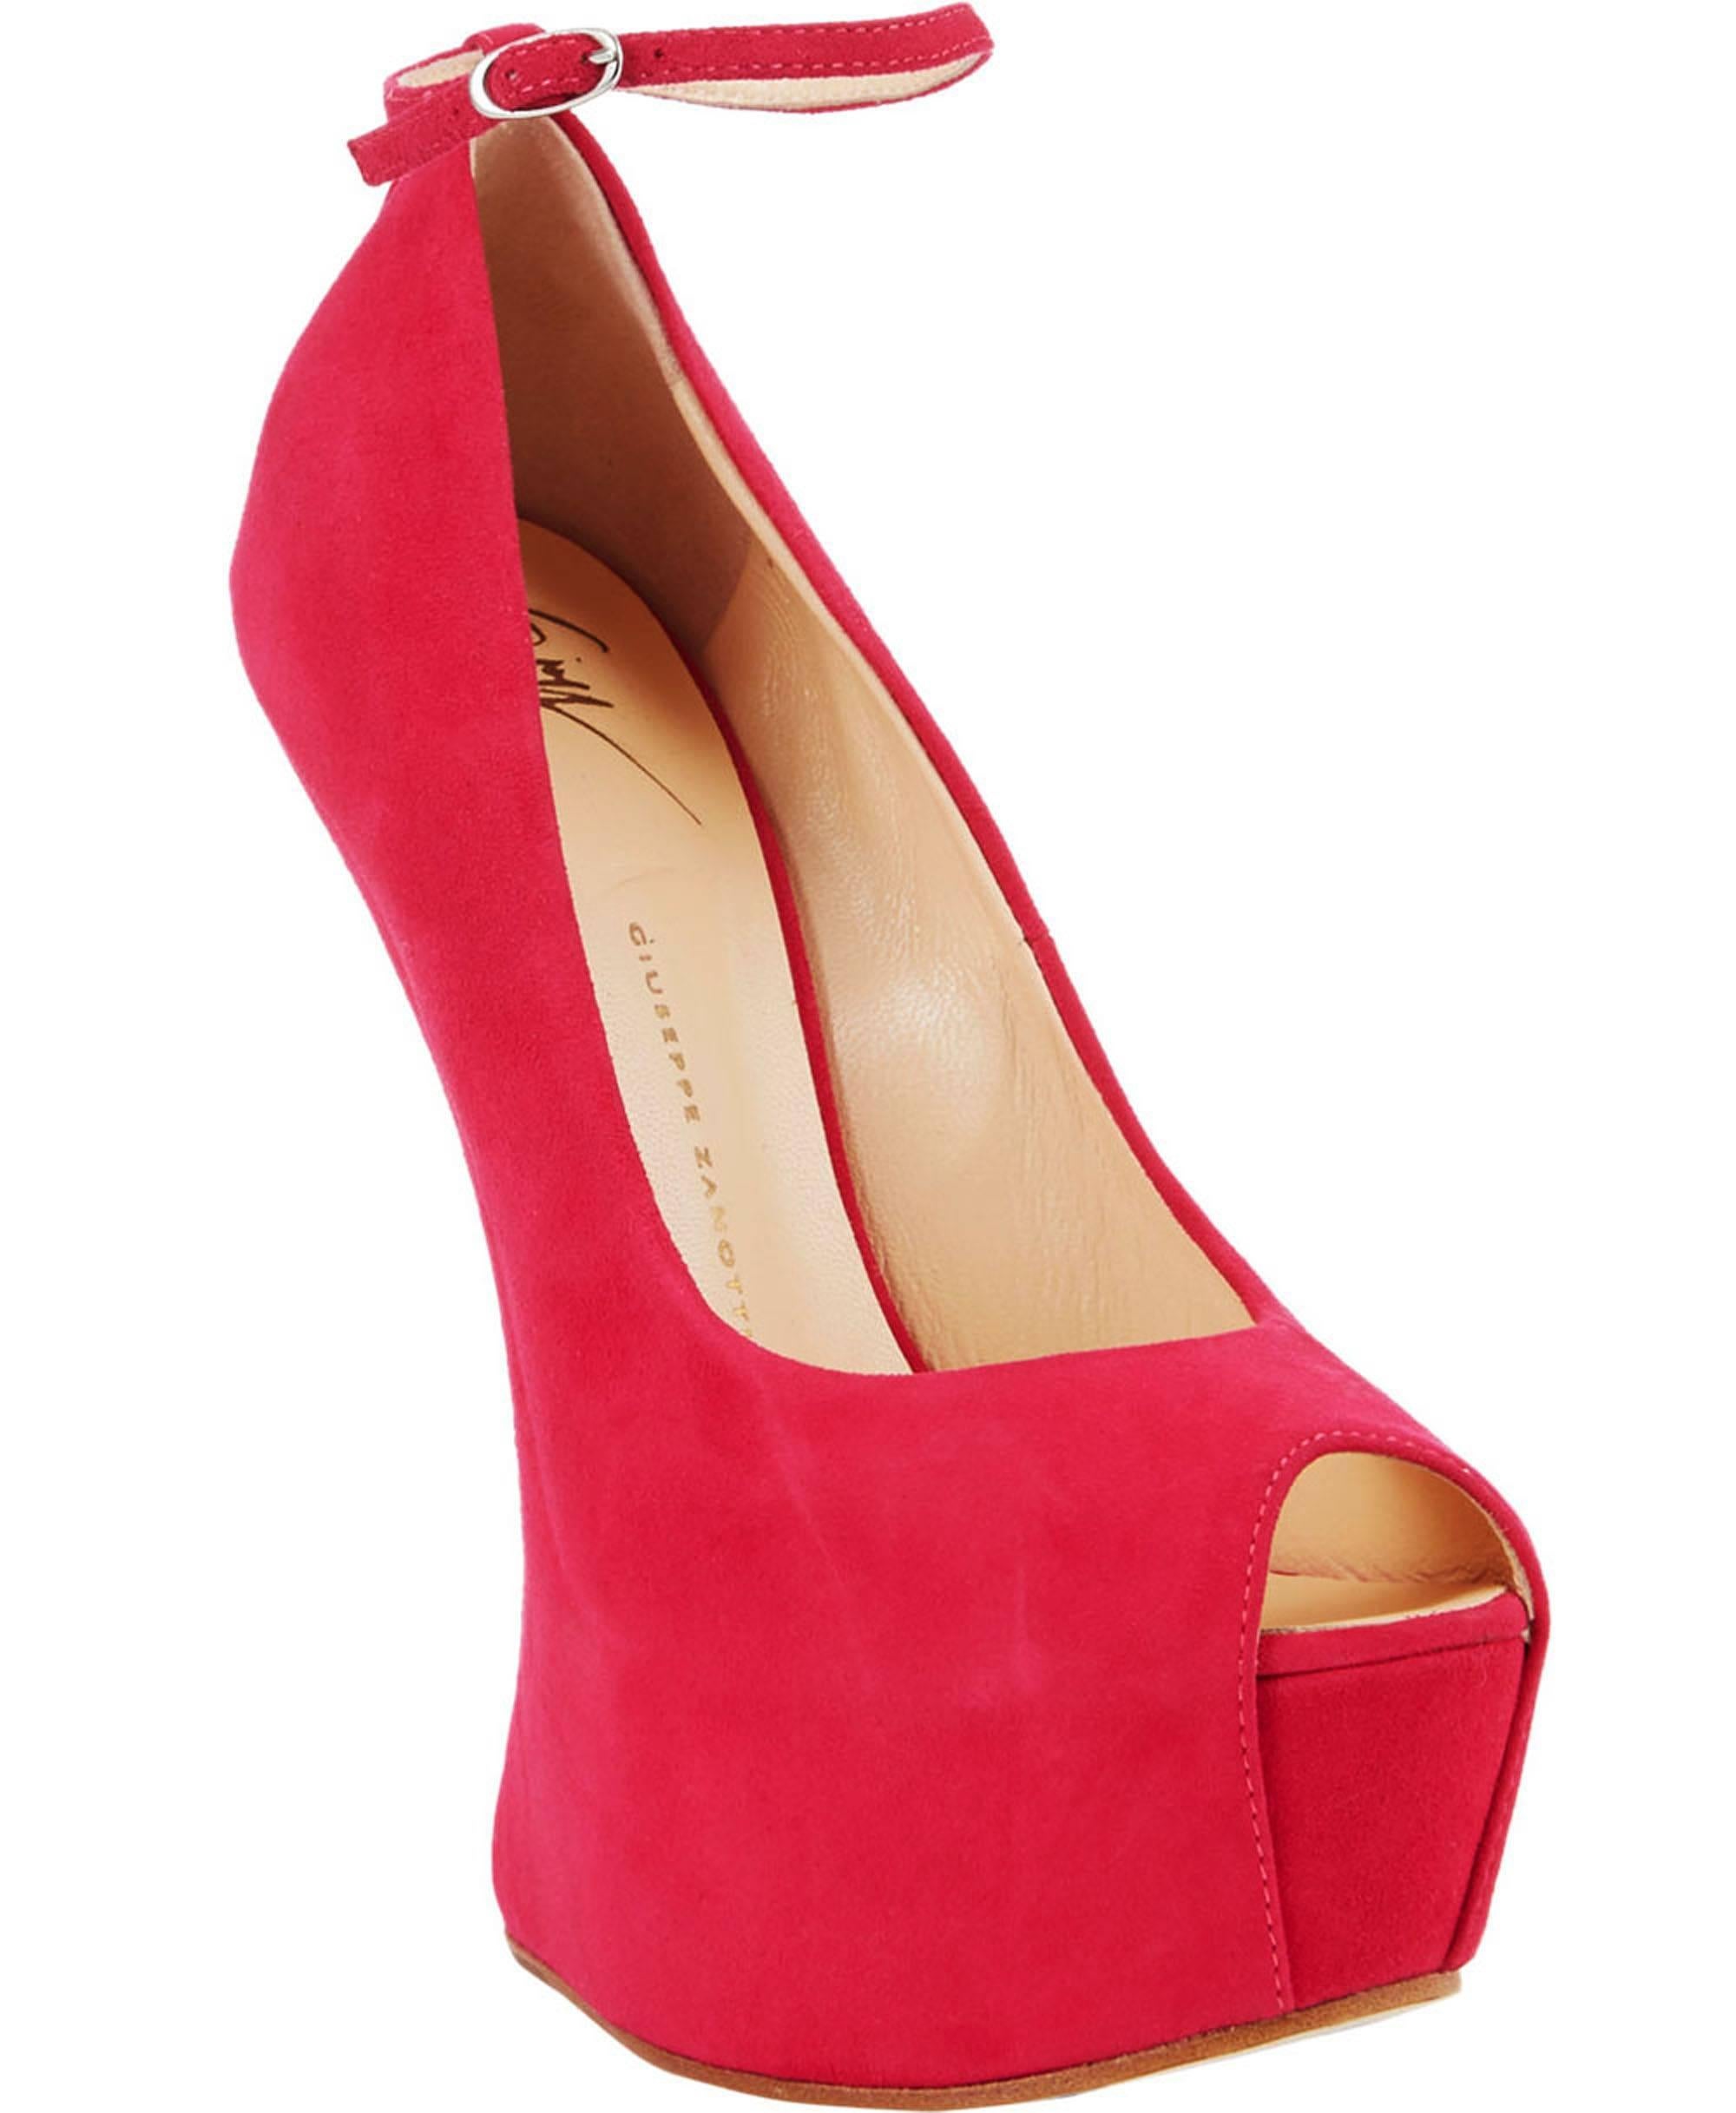 New GIUSEPPE ZANOTTI Bougainvillea Sculpted Wedges Jem Open Toe Pump 39 In New Condition For Sale In Montgomery, TX